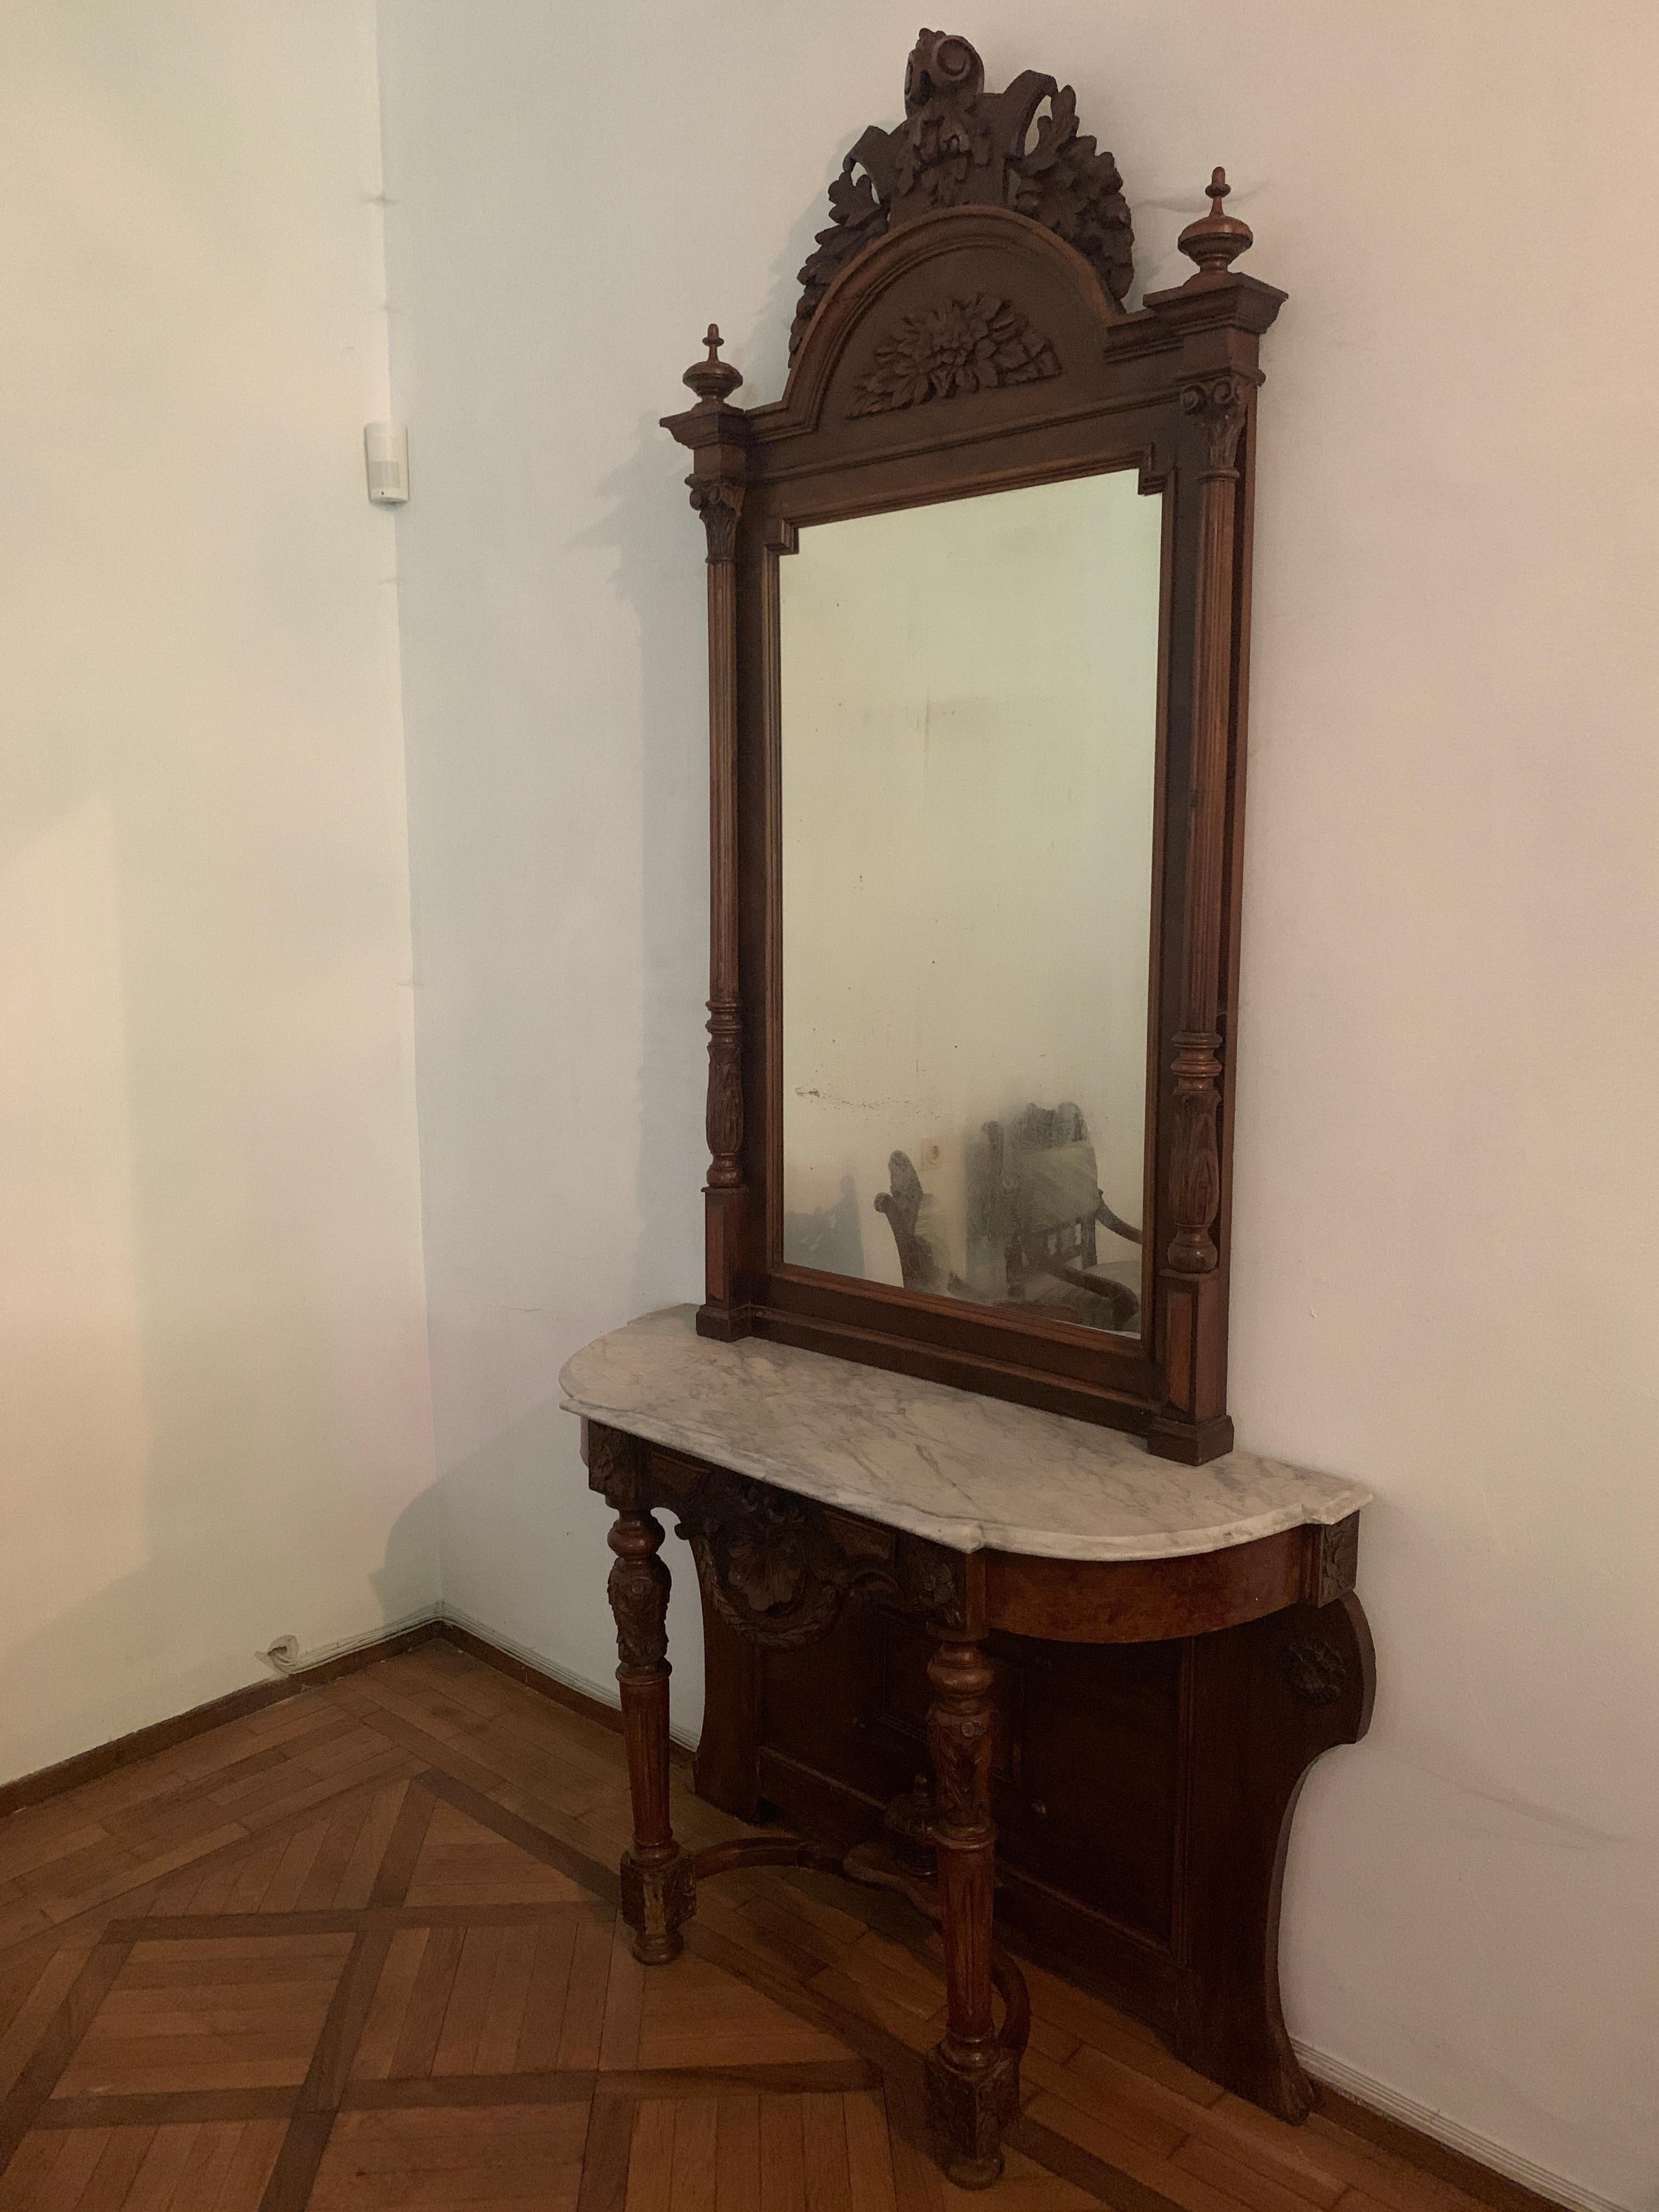 Grand hand carved walnut console with original mirror with fine carvings and marble top.
No restorations,
France, circa 1880.